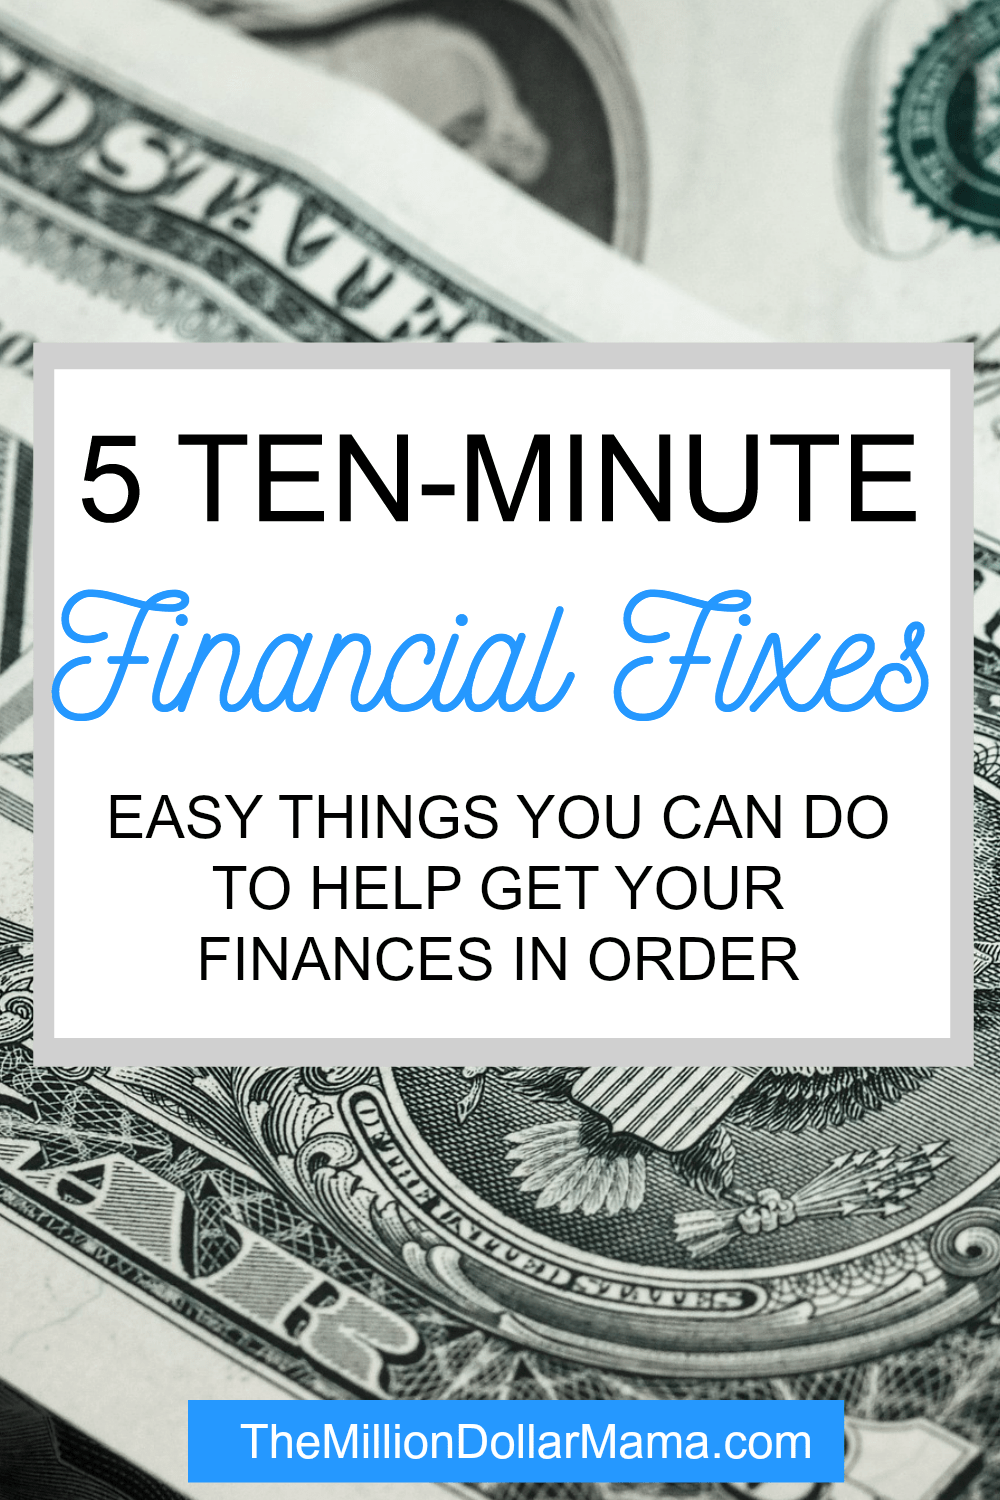 These easy financial fixes well help you get your finances in order